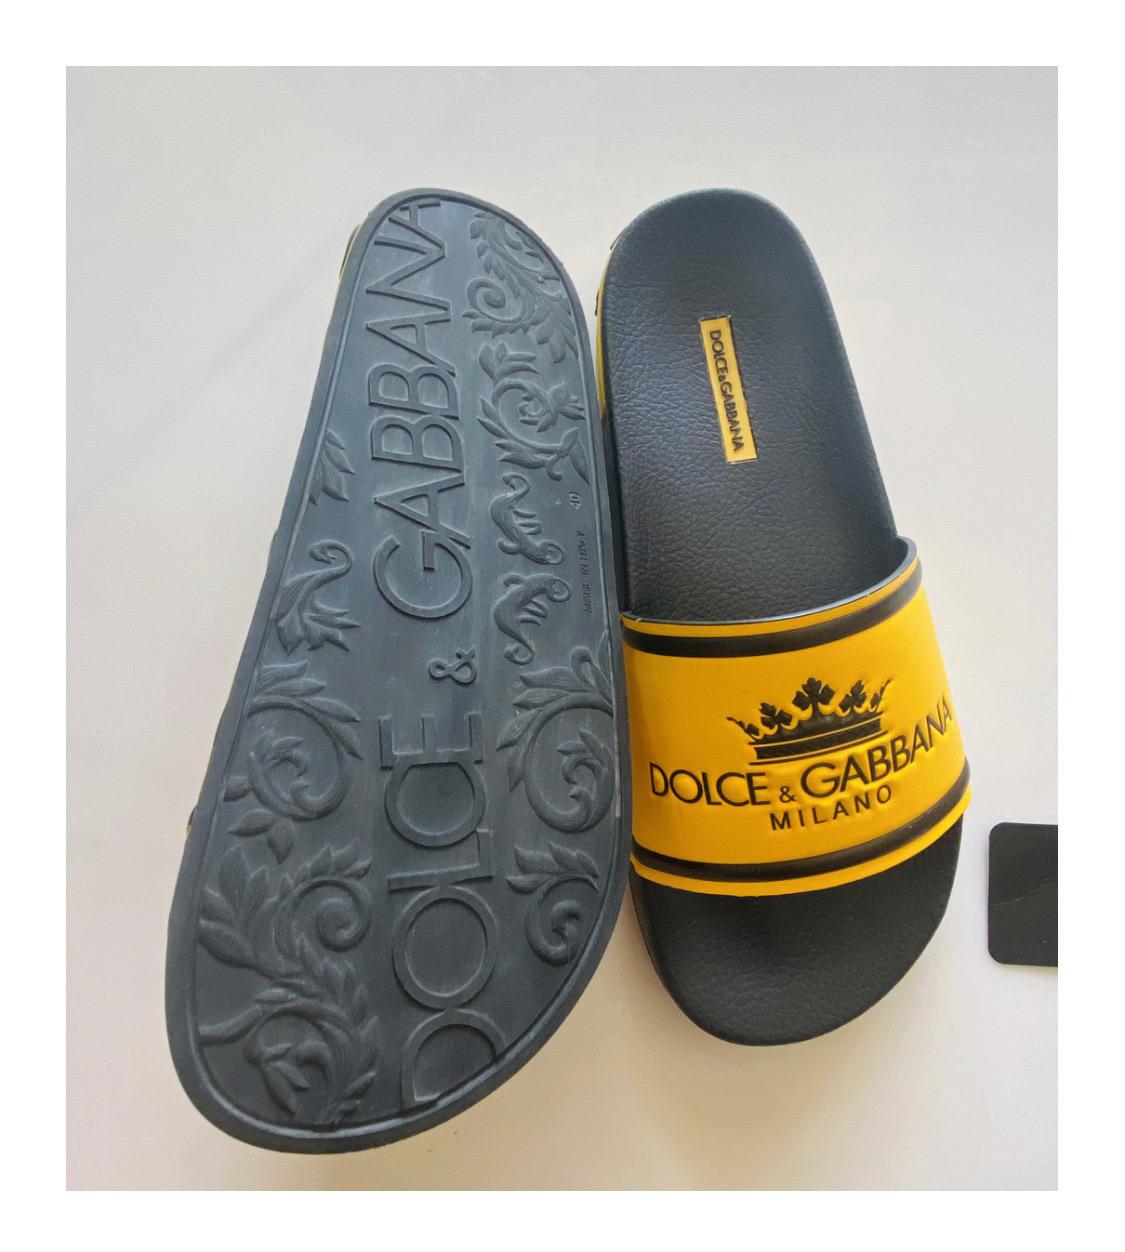 Dolce & Gabbana Yellow Logo flip
flops shoes slides

Unisex

Size 40, UK 7

Brand new with box.

Please check my other DG clothing &

accessories! 